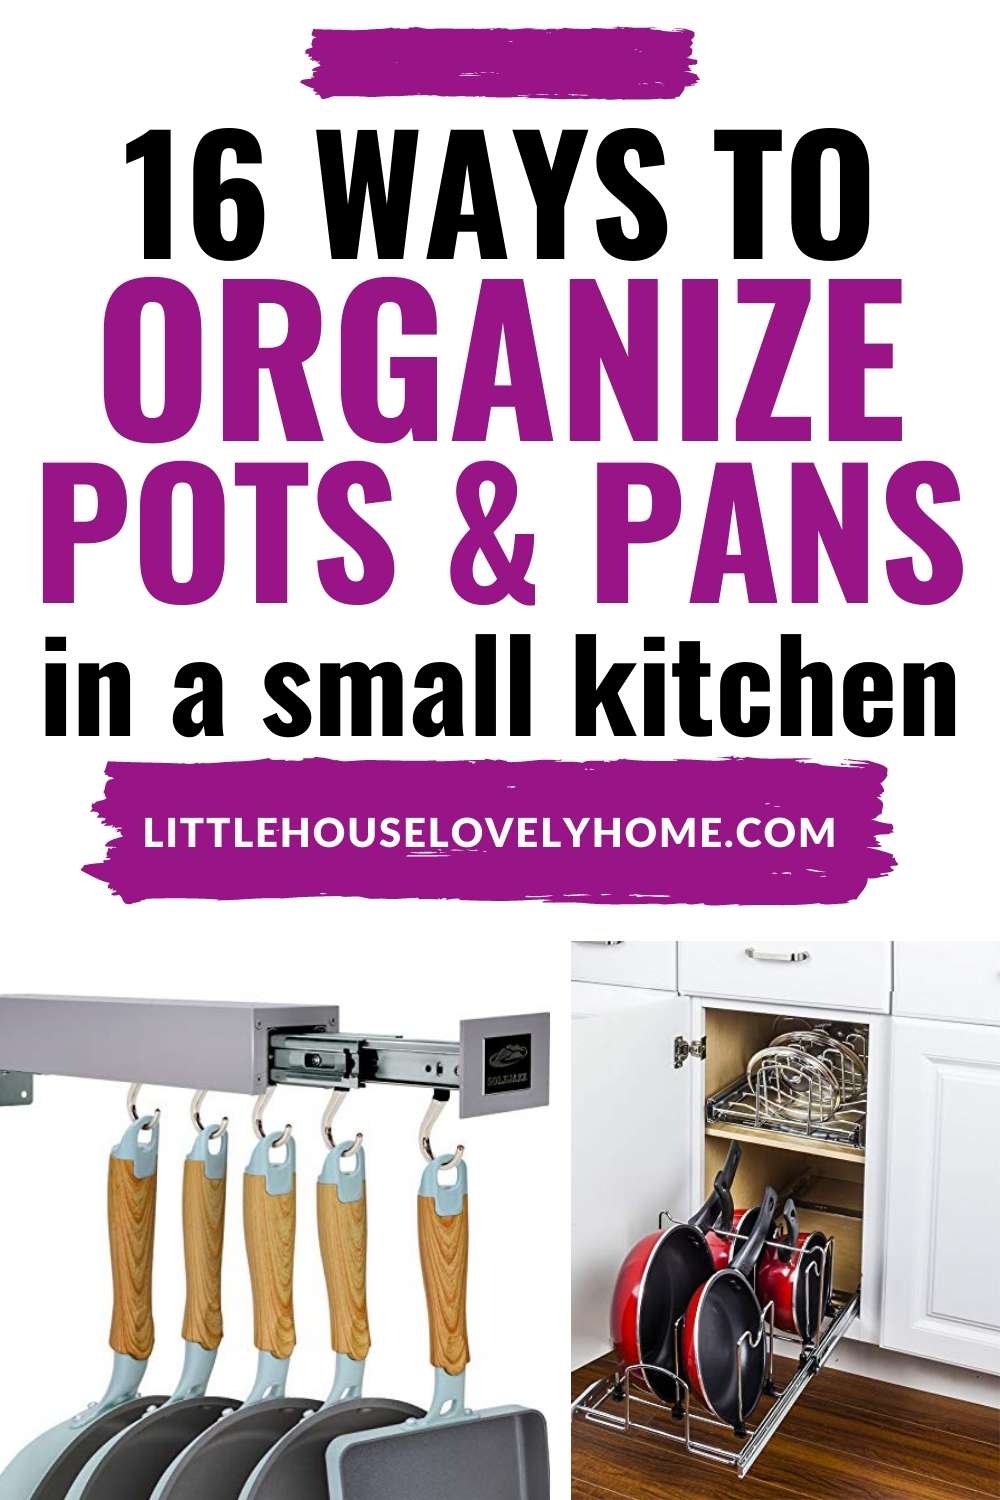 16 Ways To Organize Pots And Pans in a Small Kitchen